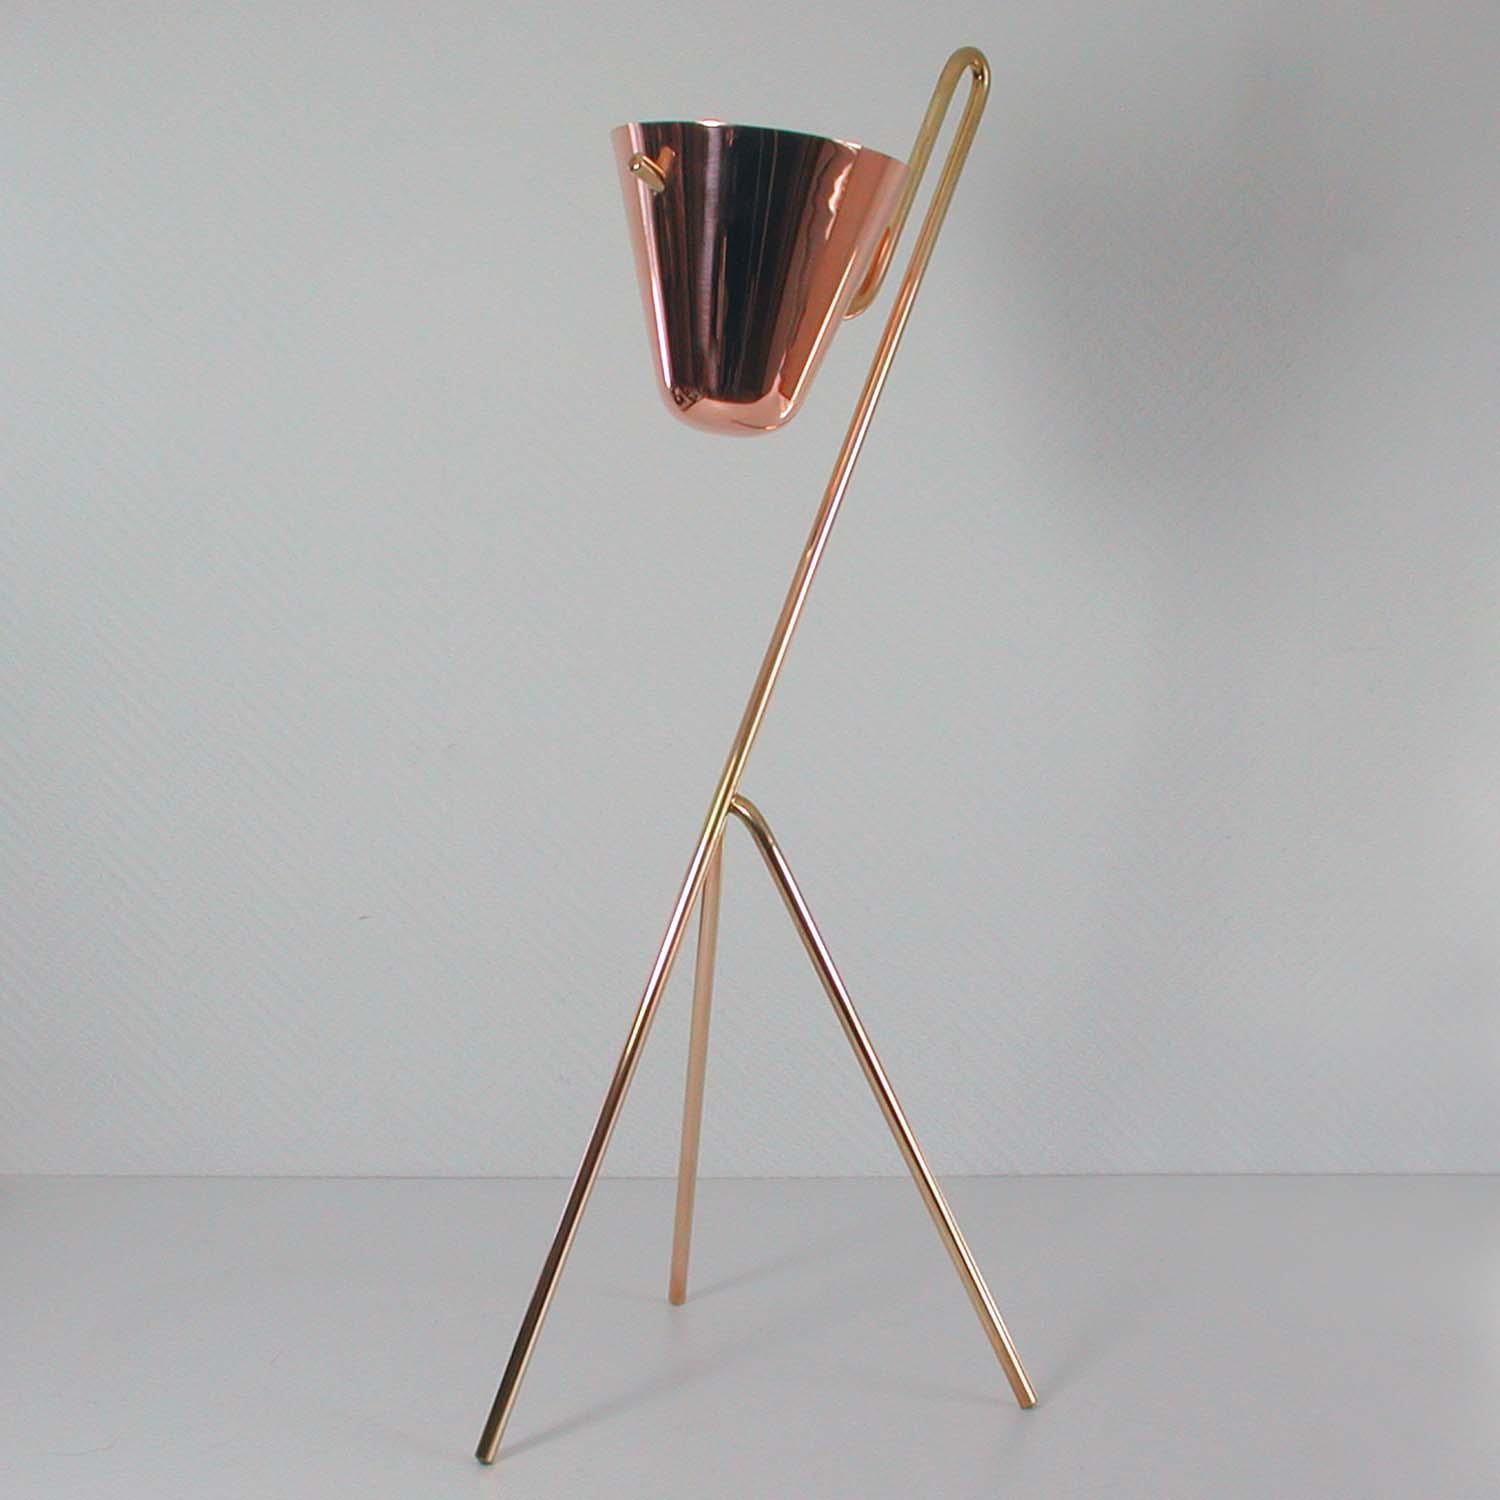 This very rare 1950s standing floor ashtray was designed by Carl Auböck and produced by Carl Auböck Wertstatten in Vienna in the 1950s. It is model number 3866.

It has got a brass stand and a removable conical copper ashtray. It is in very good